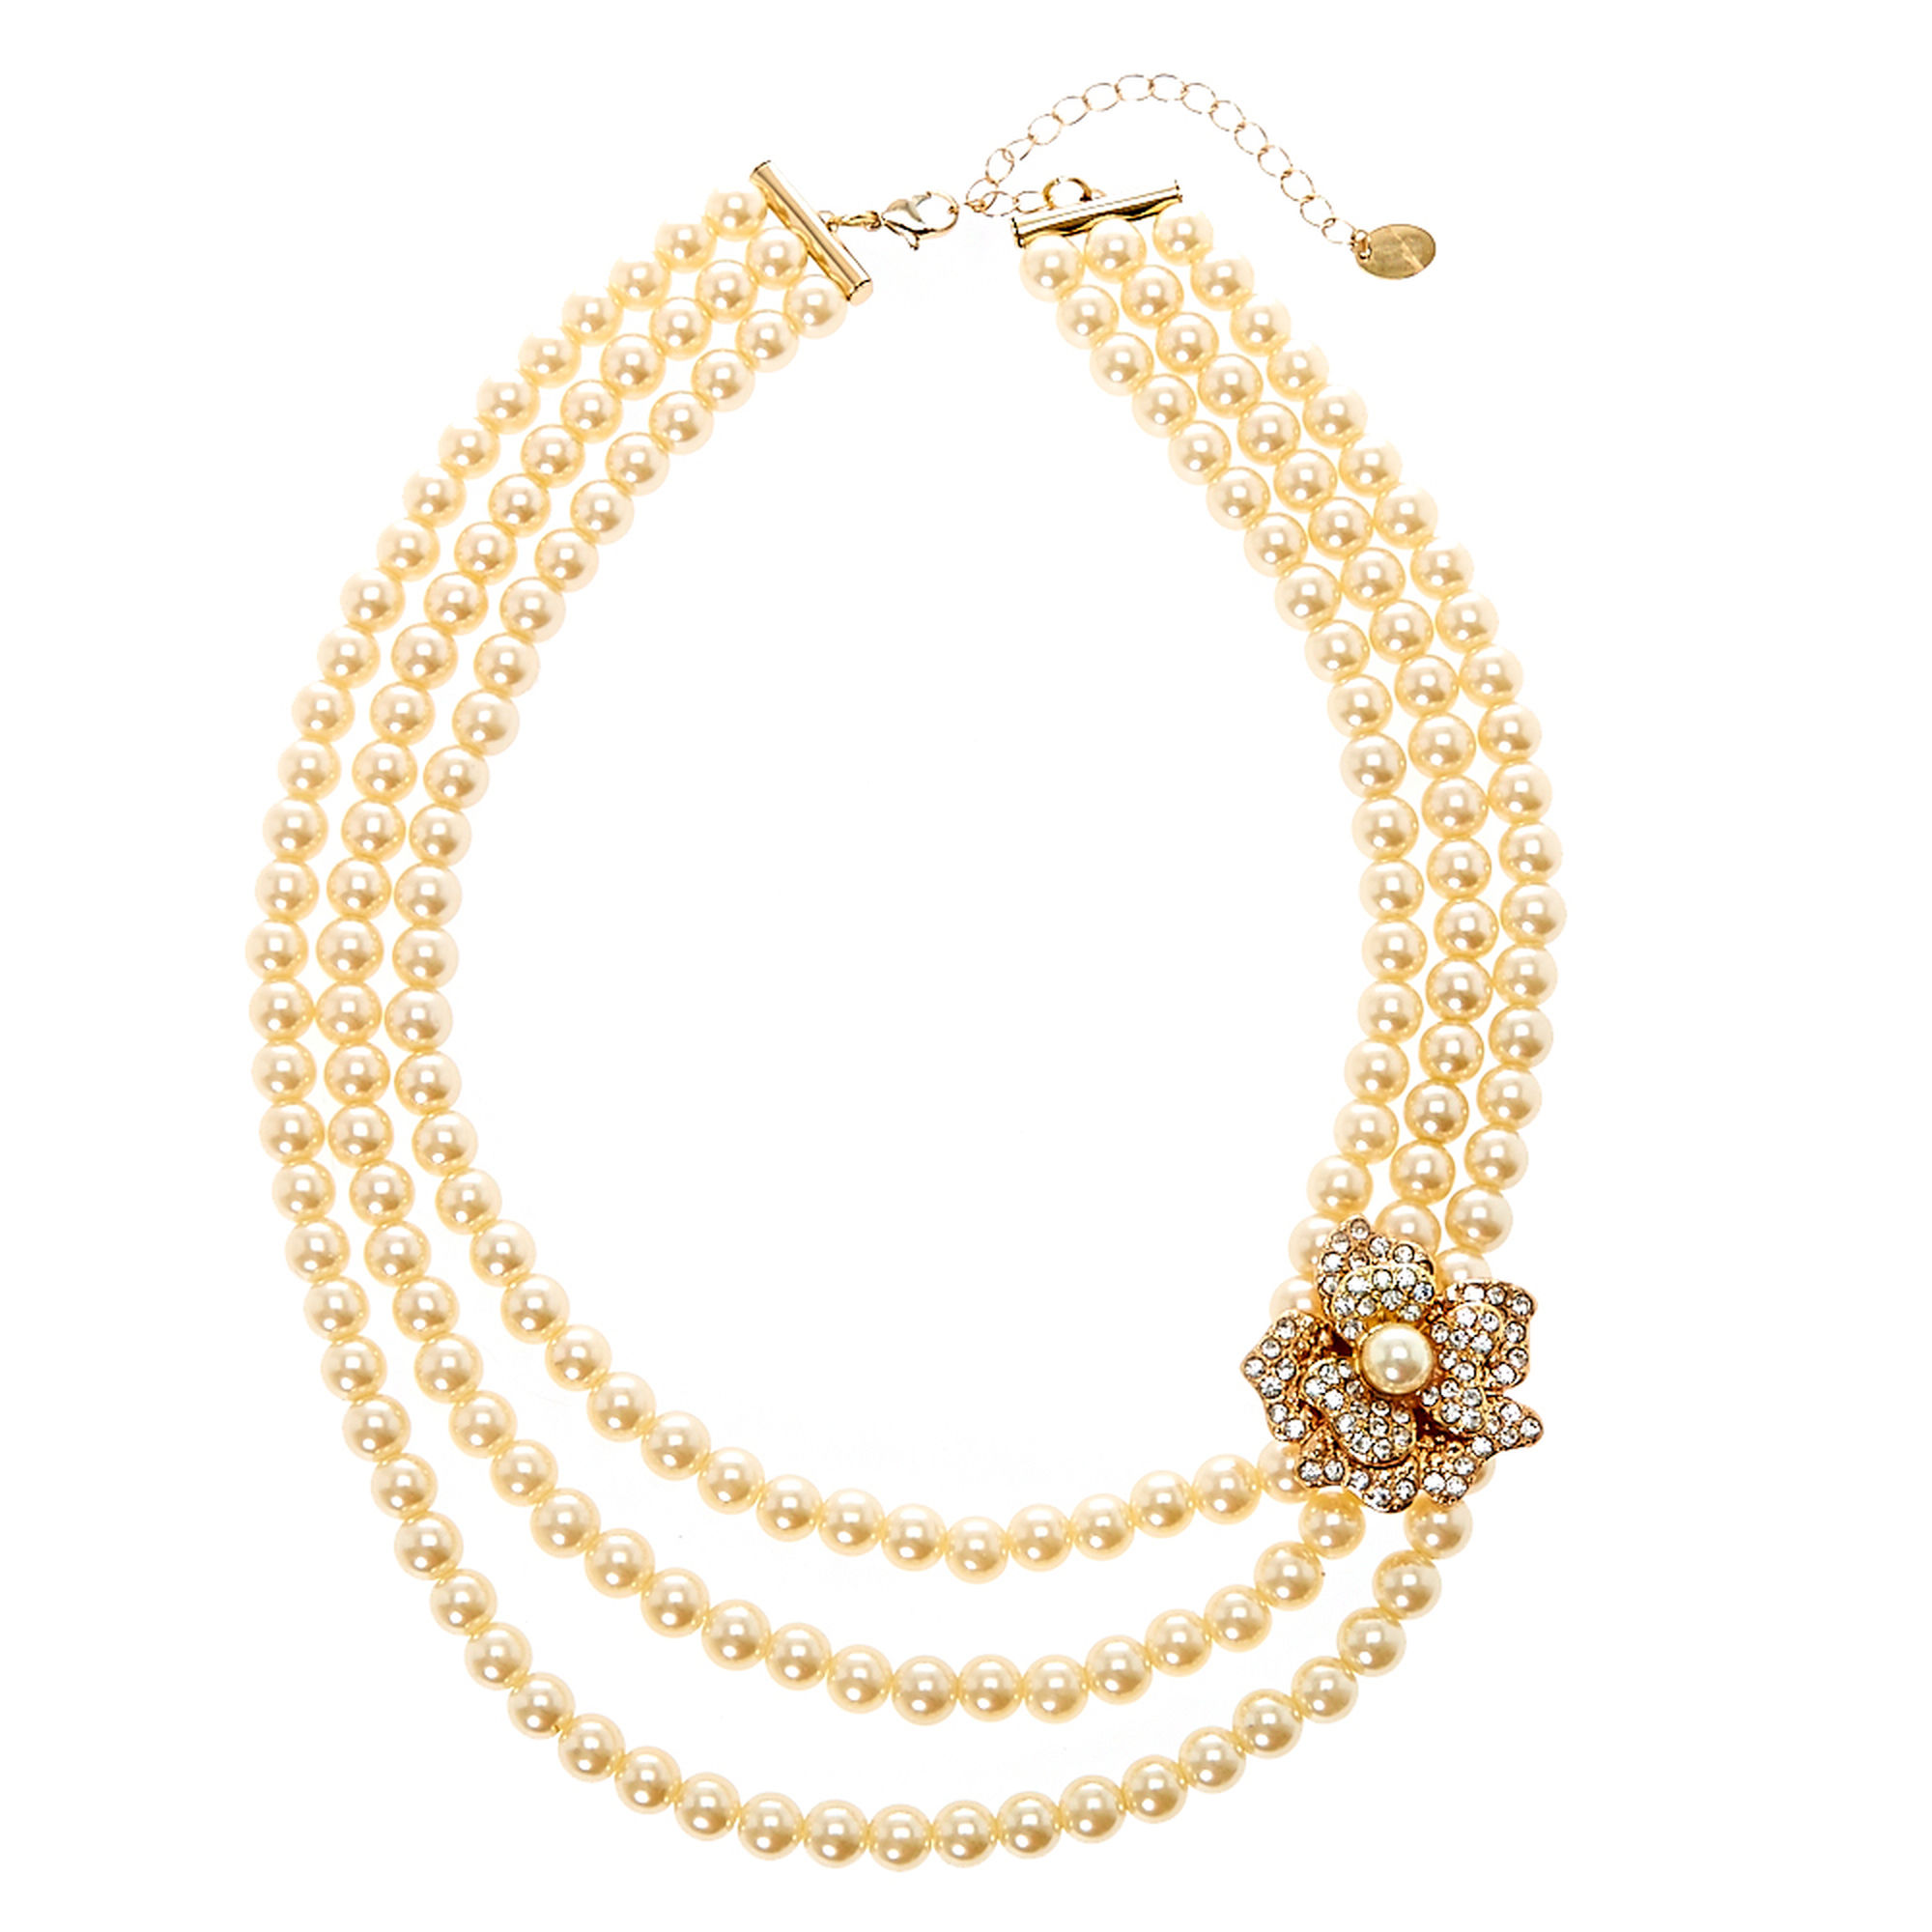 Multi-Layer Ivory Pearl Necklace with Gold Tone Flower Brooch | Icing US